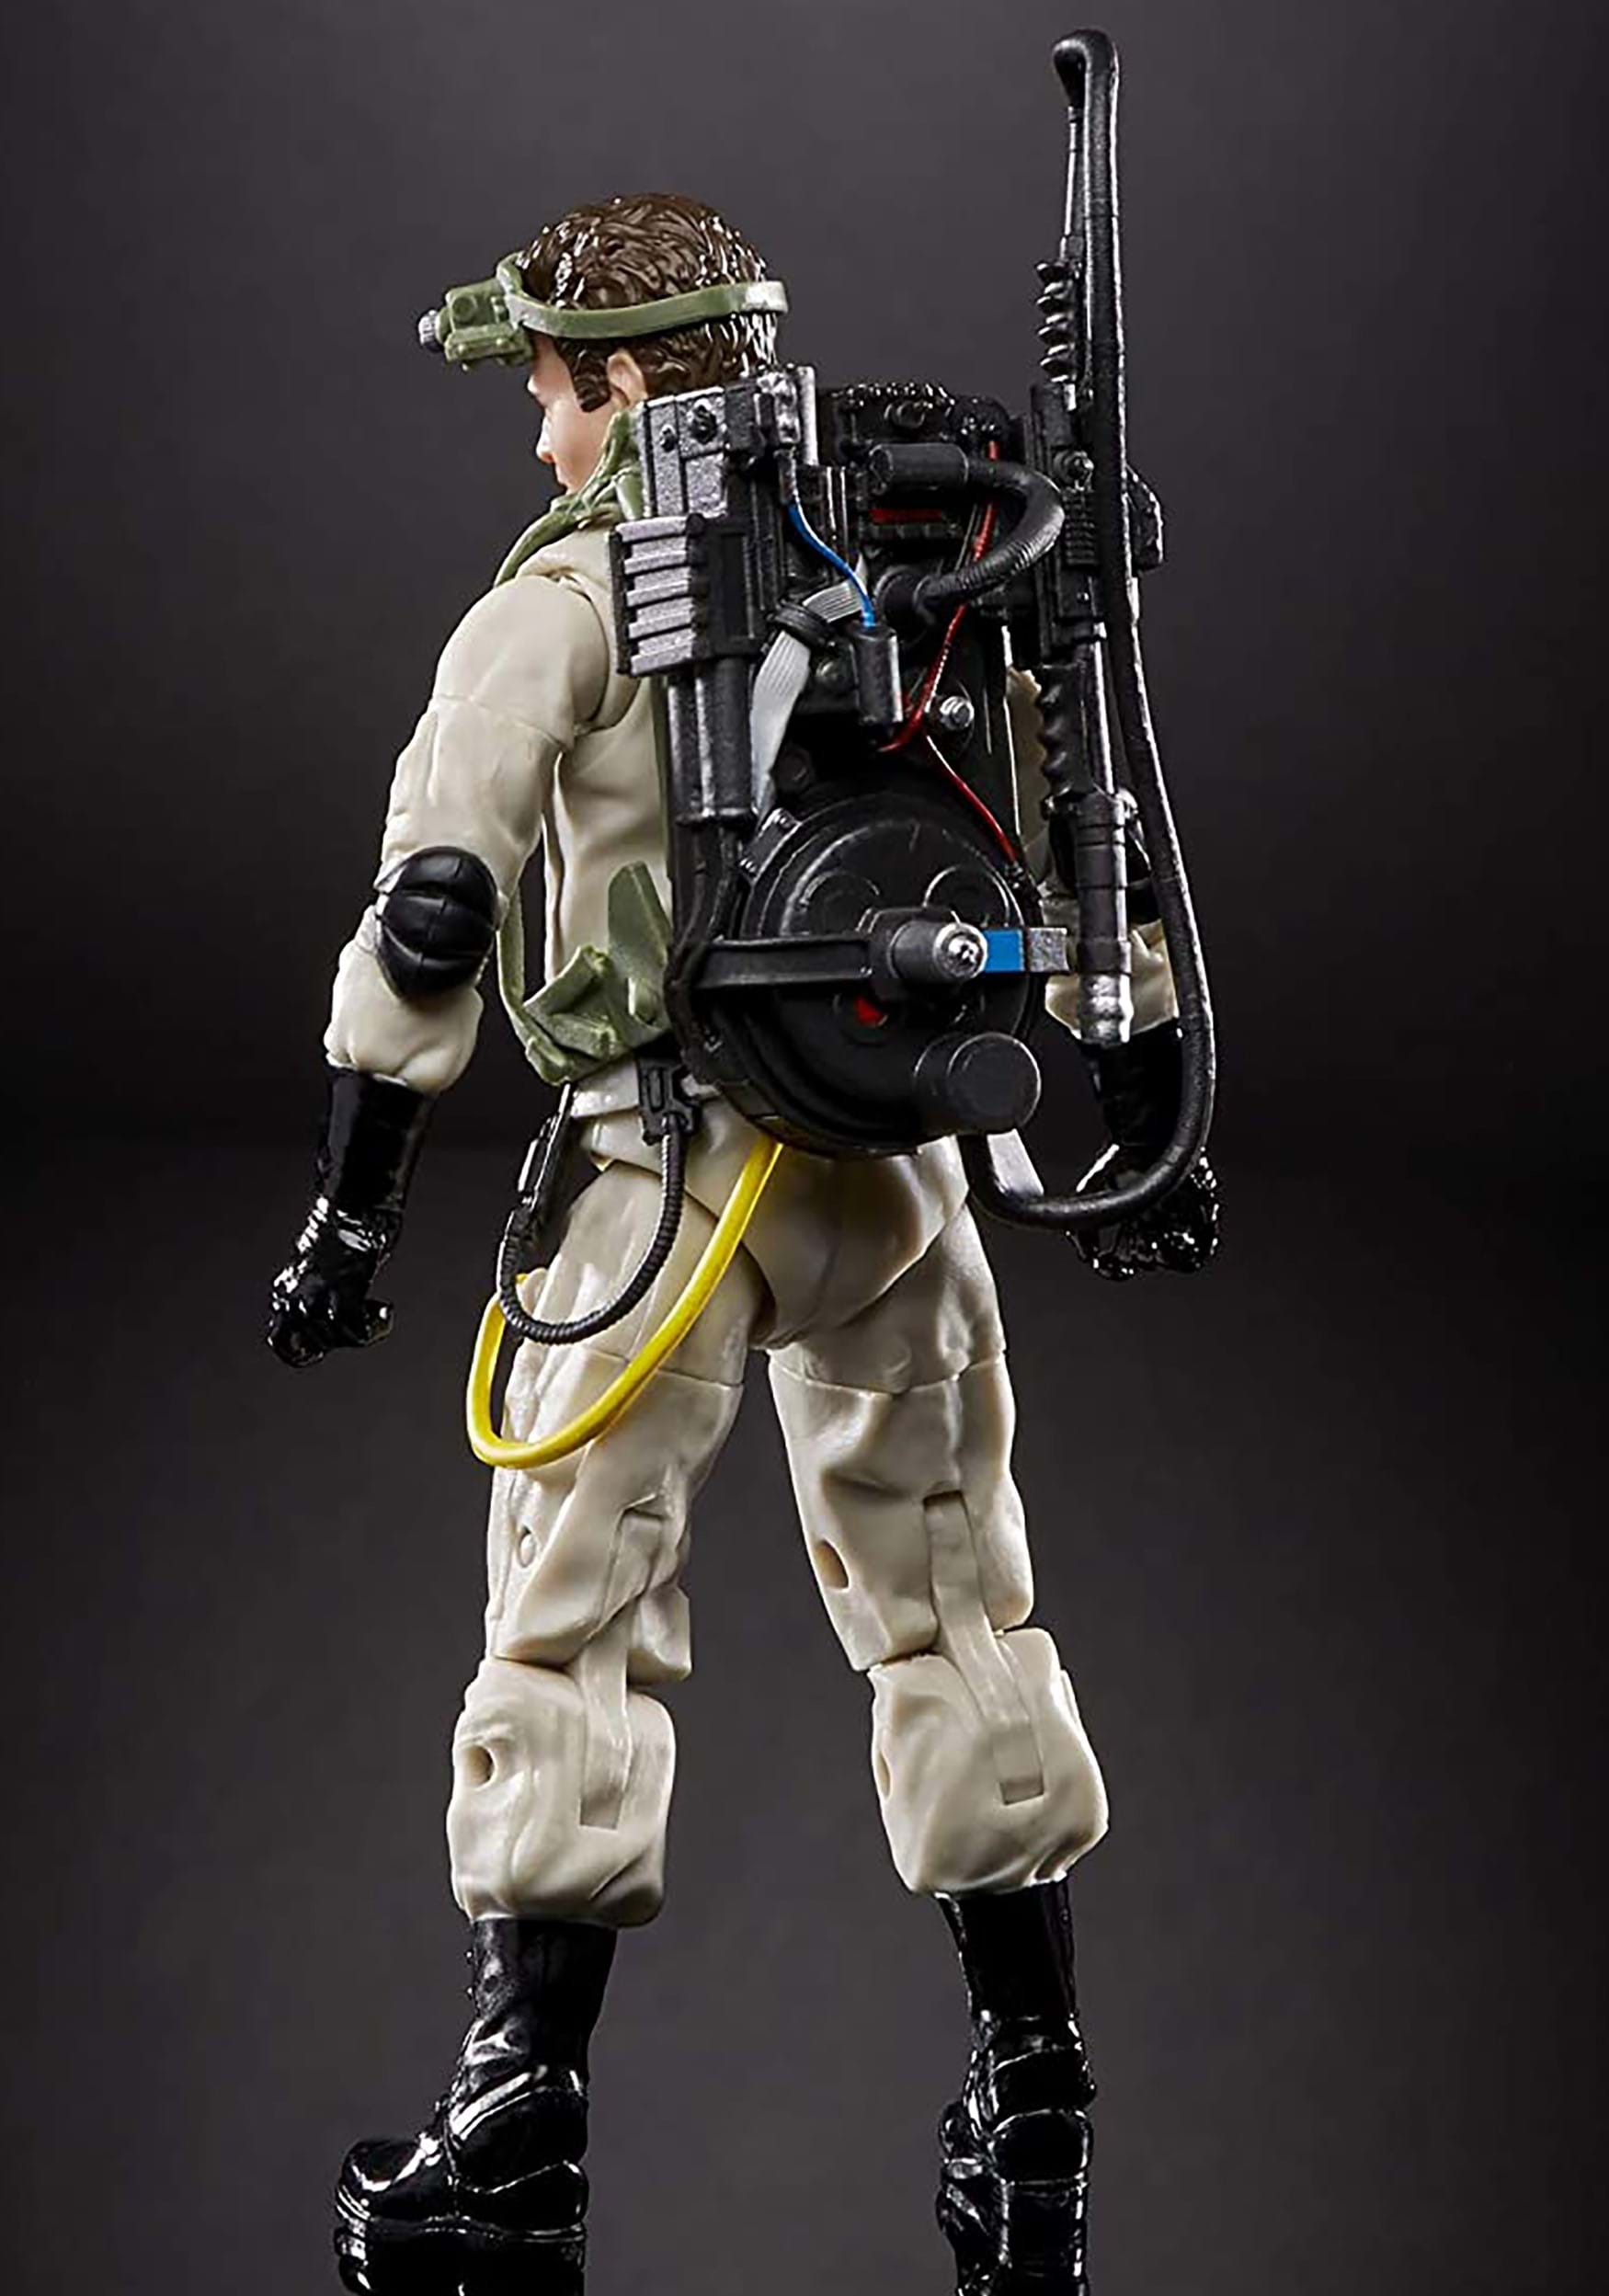 NEW! GHOSTBUSTERS 1 & 2 classic RAY STANTZ 6" deluxe poseable action figure